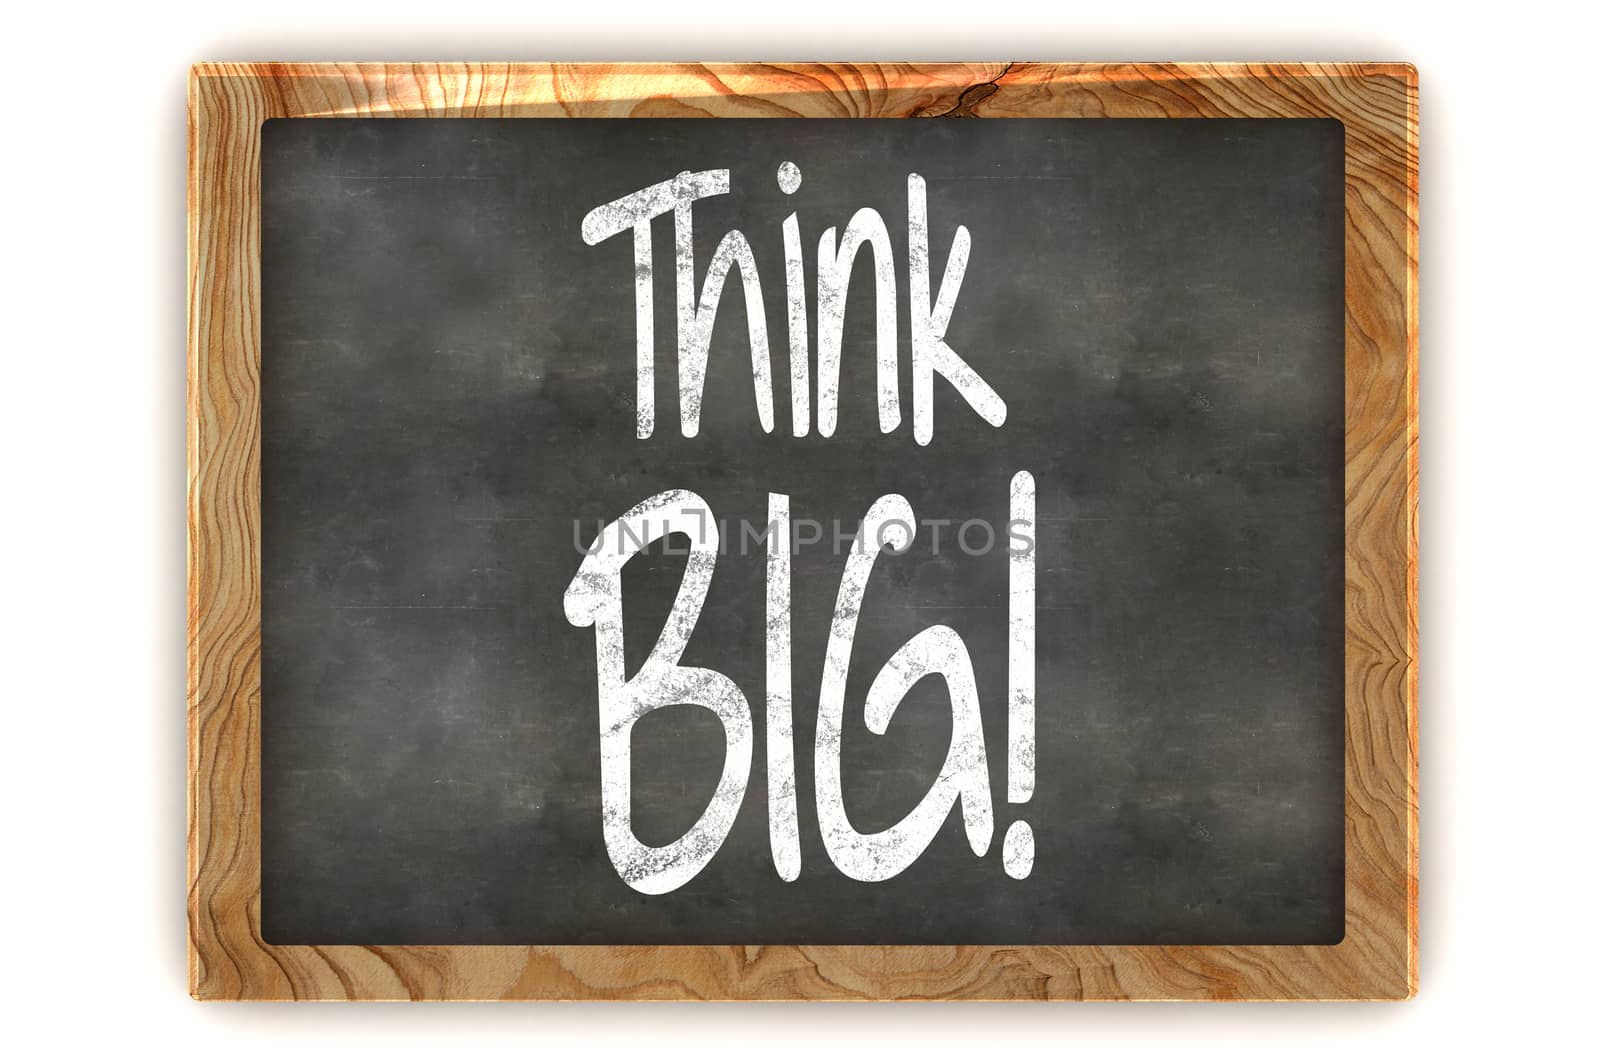 A Colourful 3d Rendered Blackboard showing the Inspirational Message "Think Big"